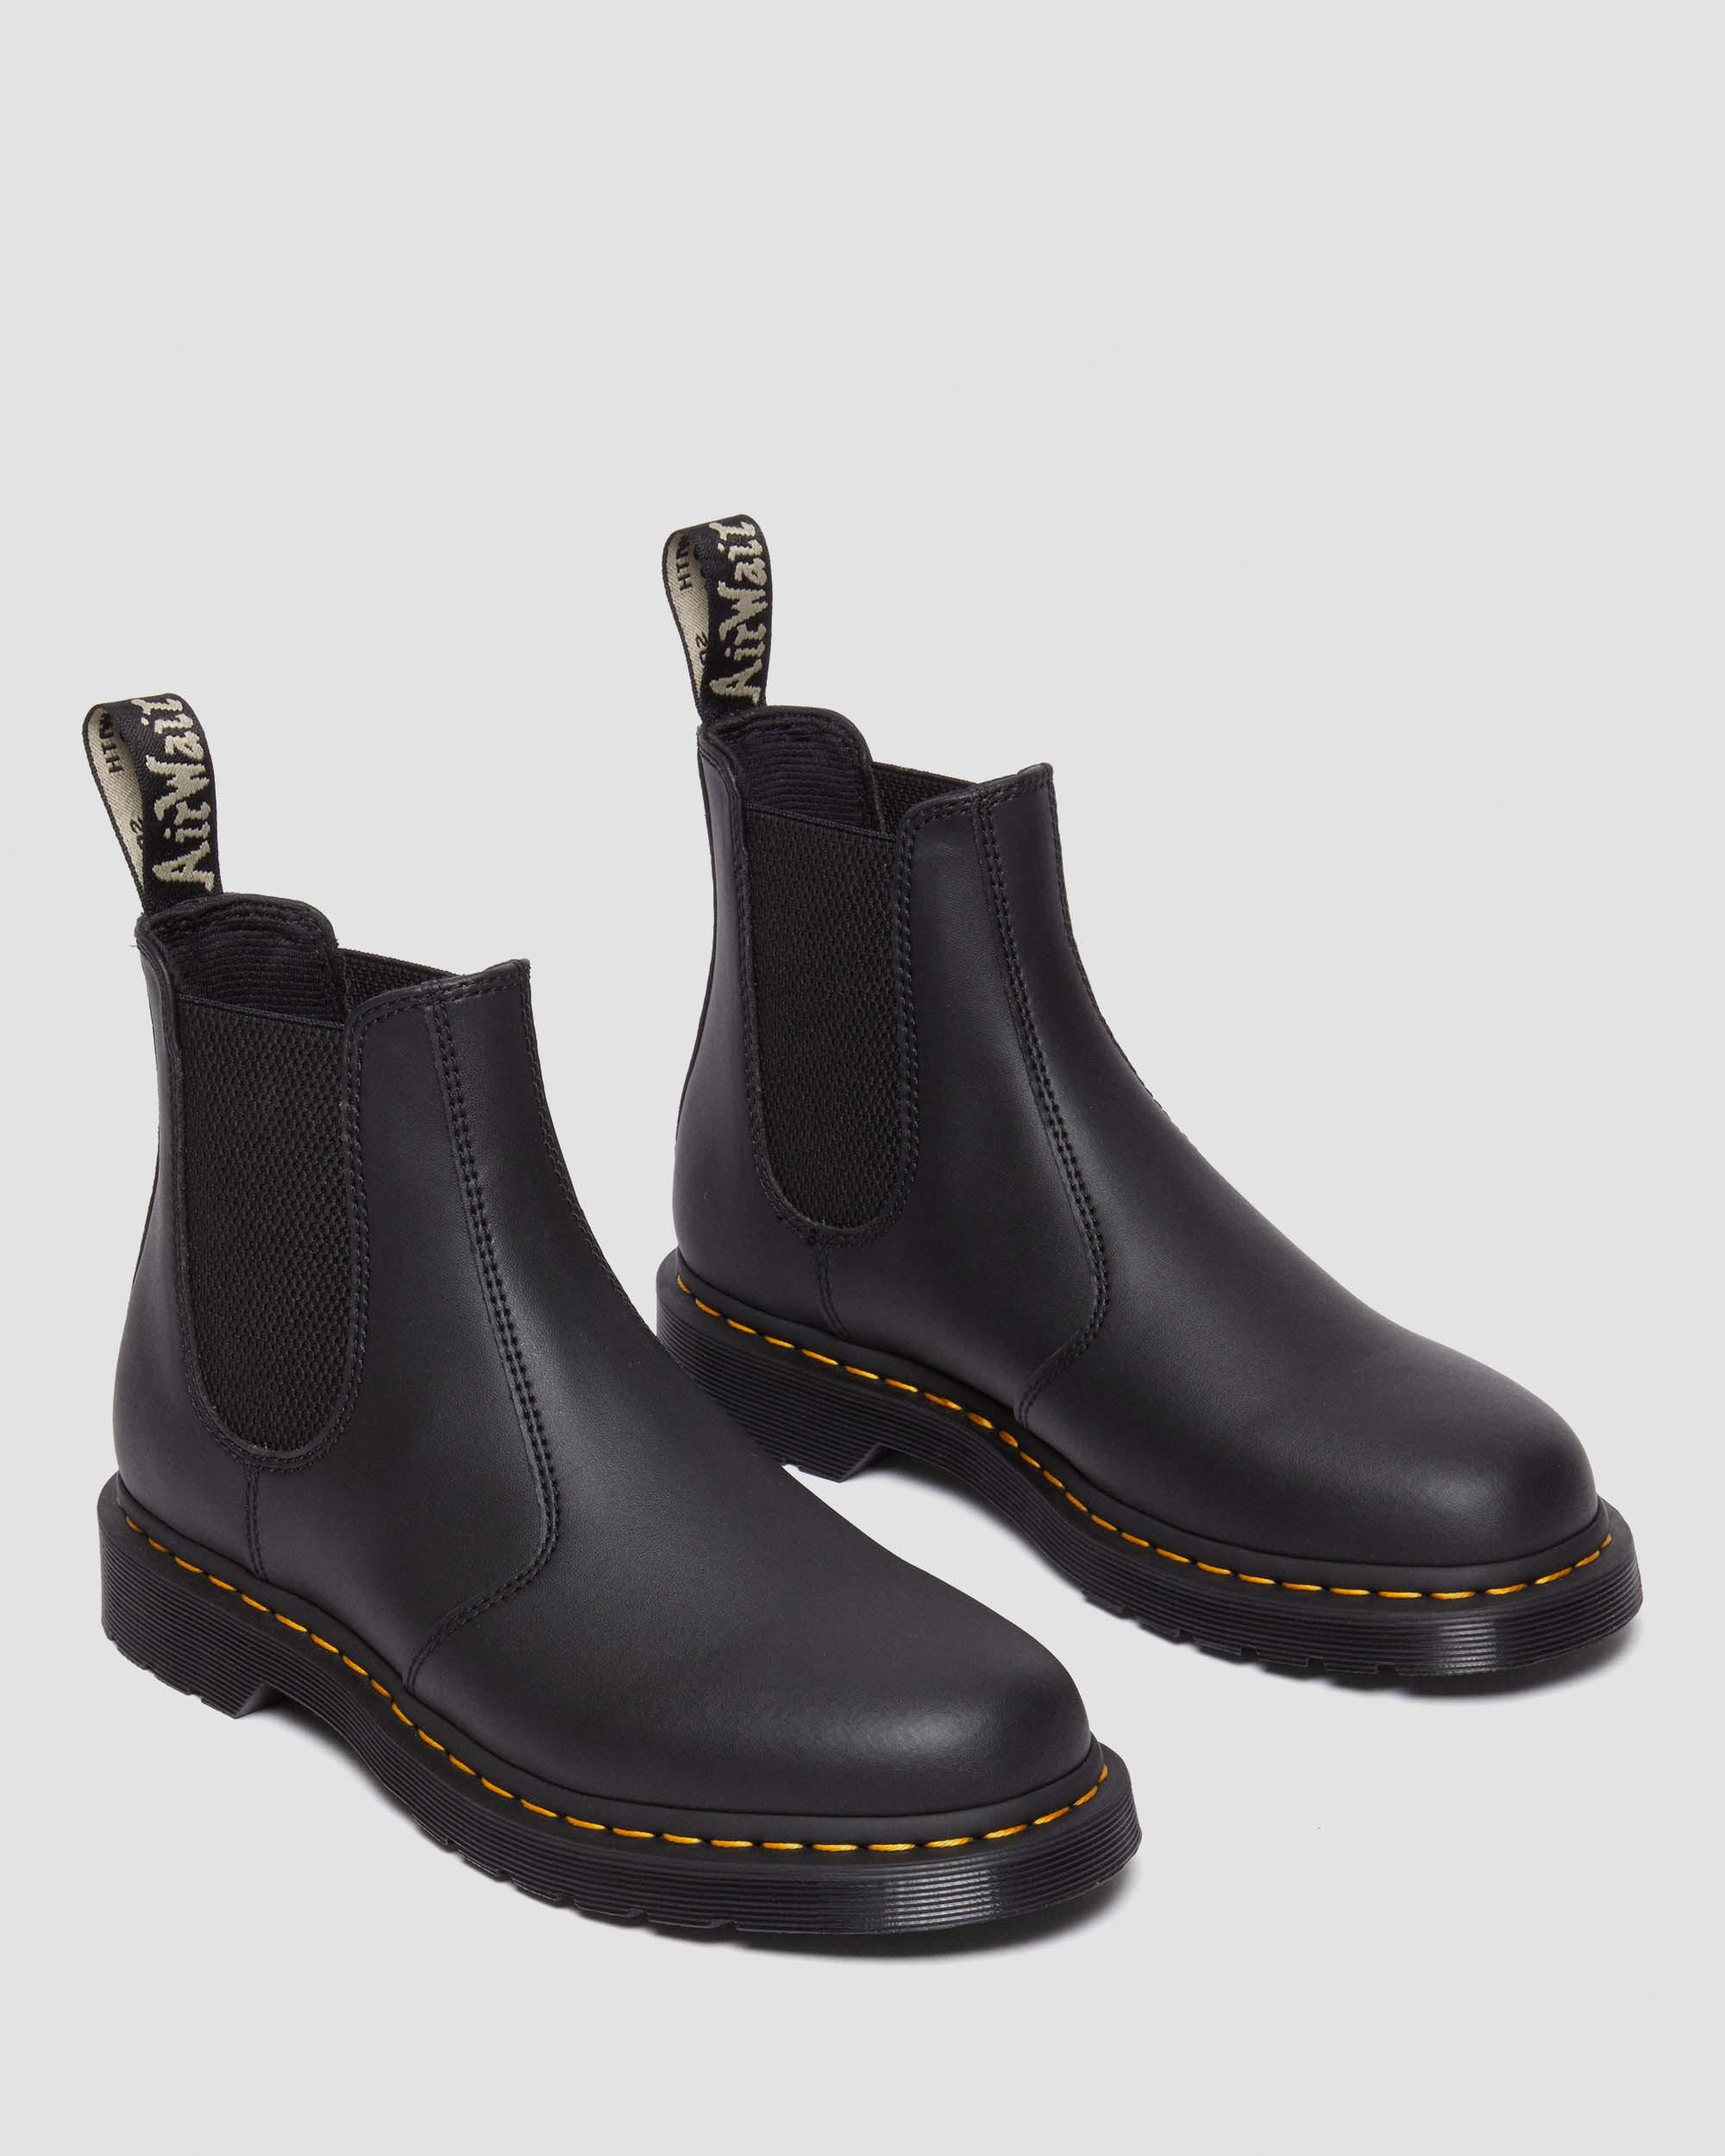 2976 Genix Nappa Reclaimed Leather Chelsea Boots in Black